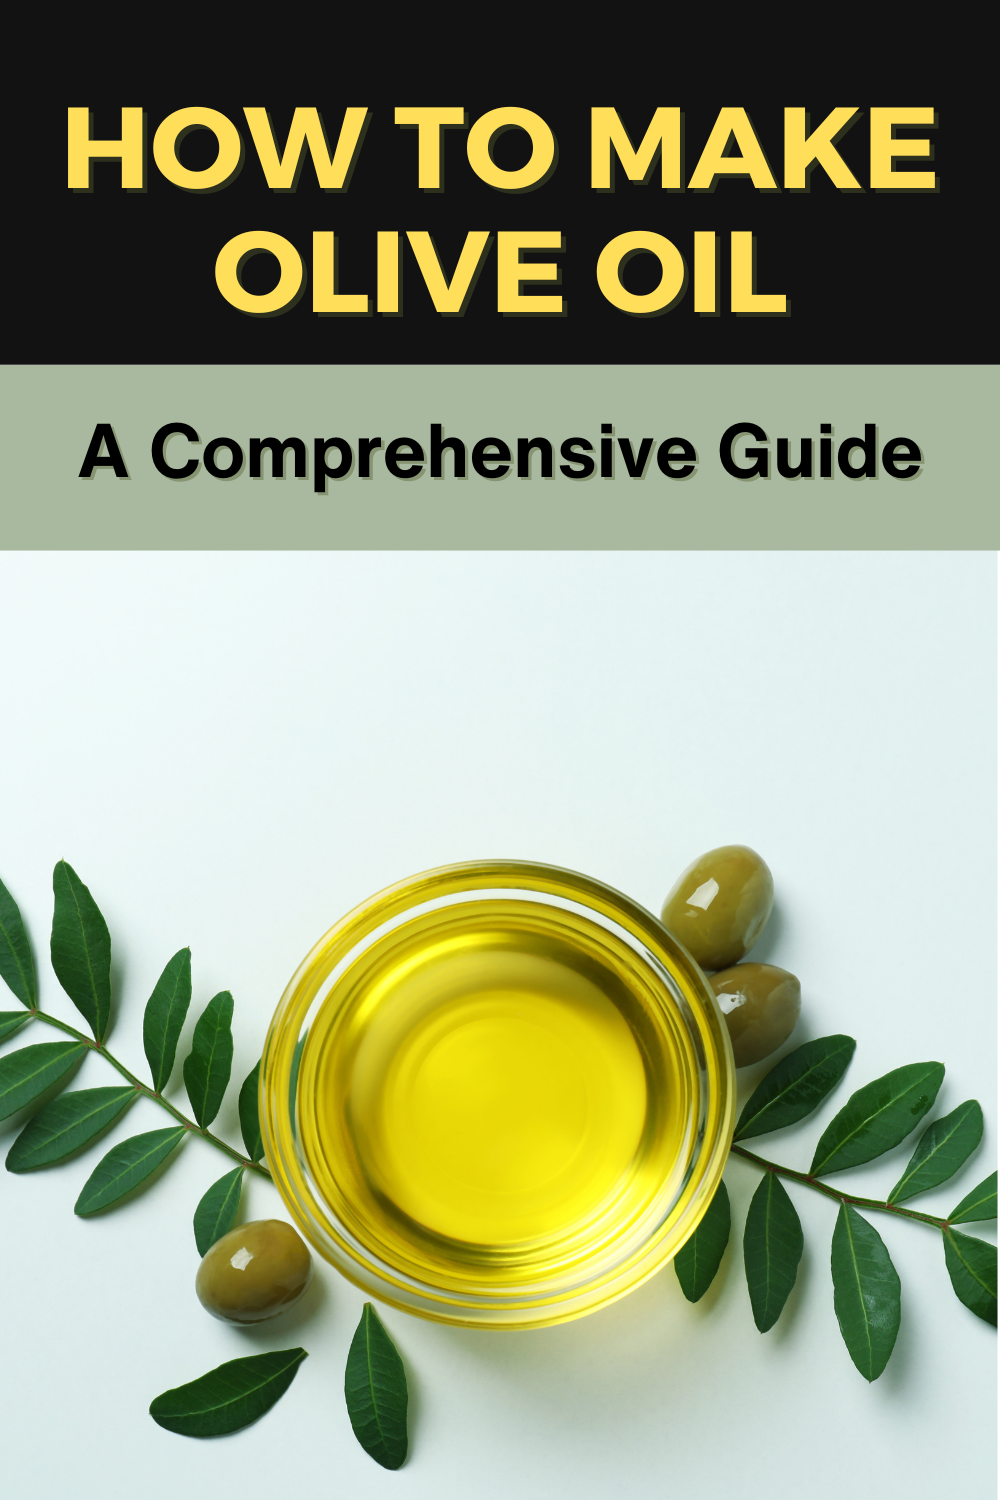 how to make olive oil at home